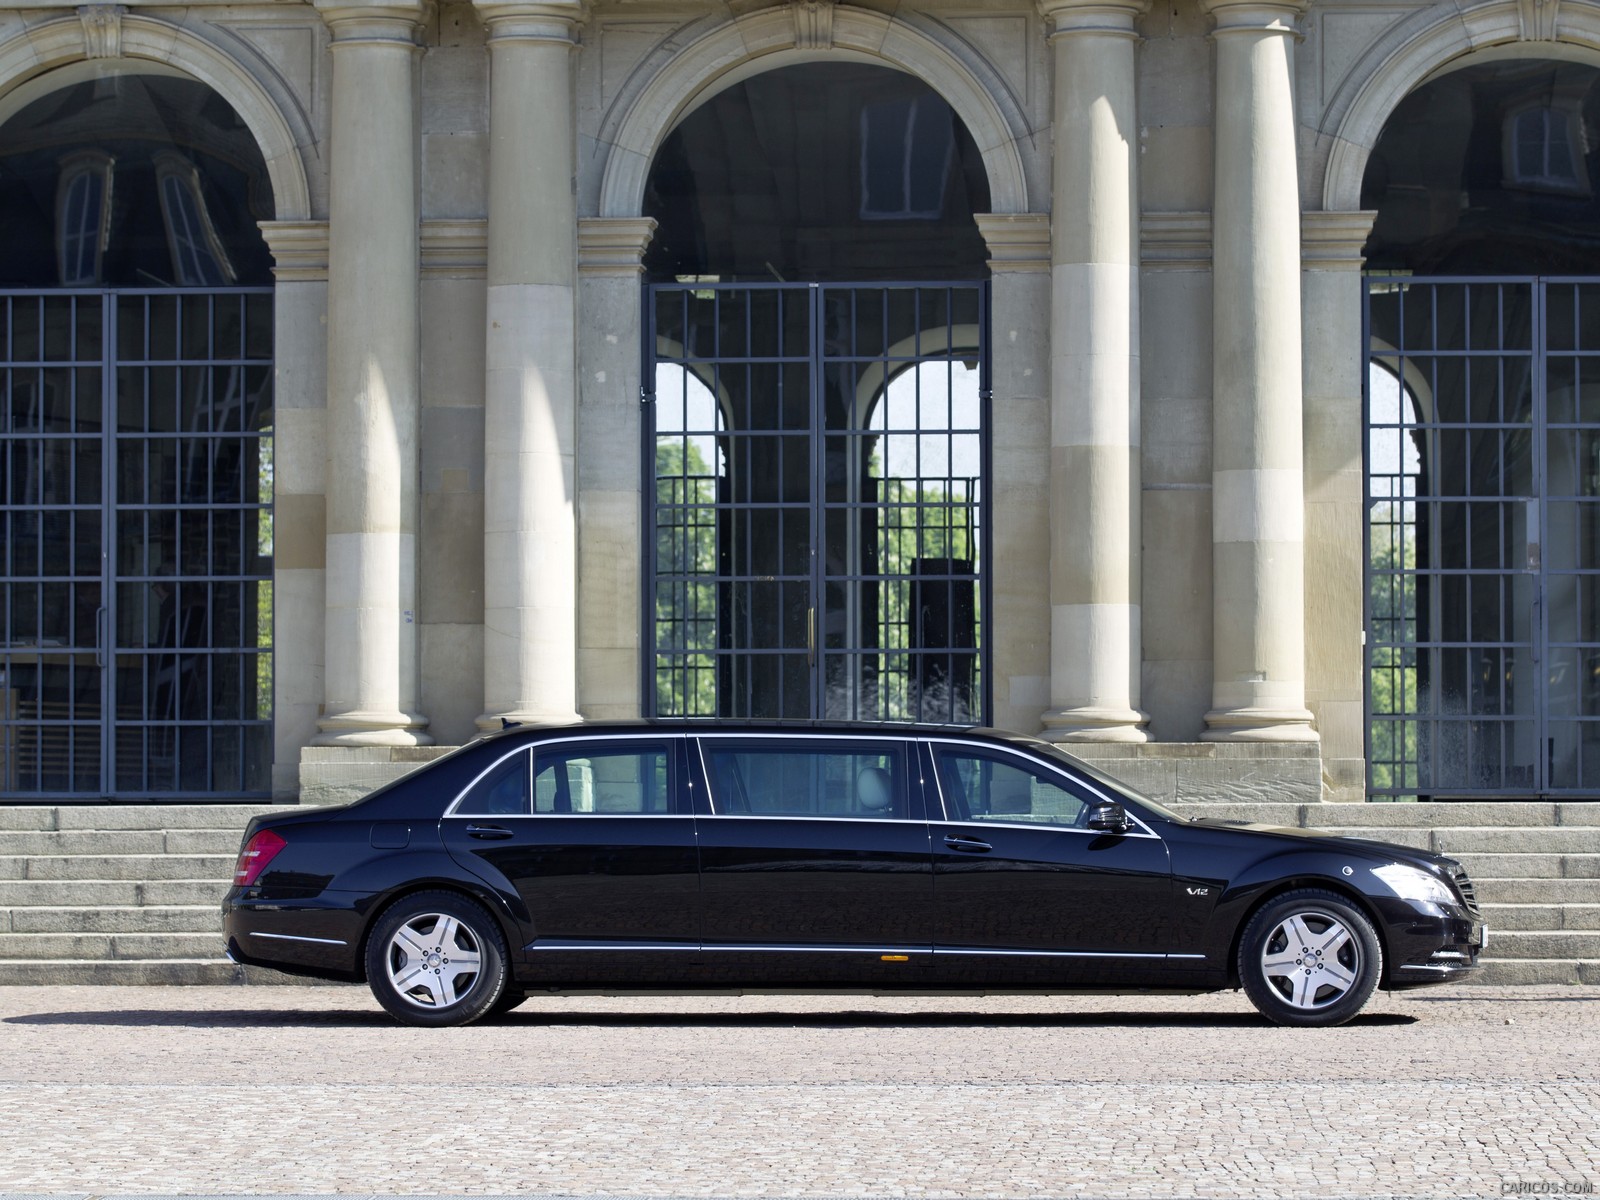 Mercedes-Benz S600 Pullman Guard  - Side, #3 of 24